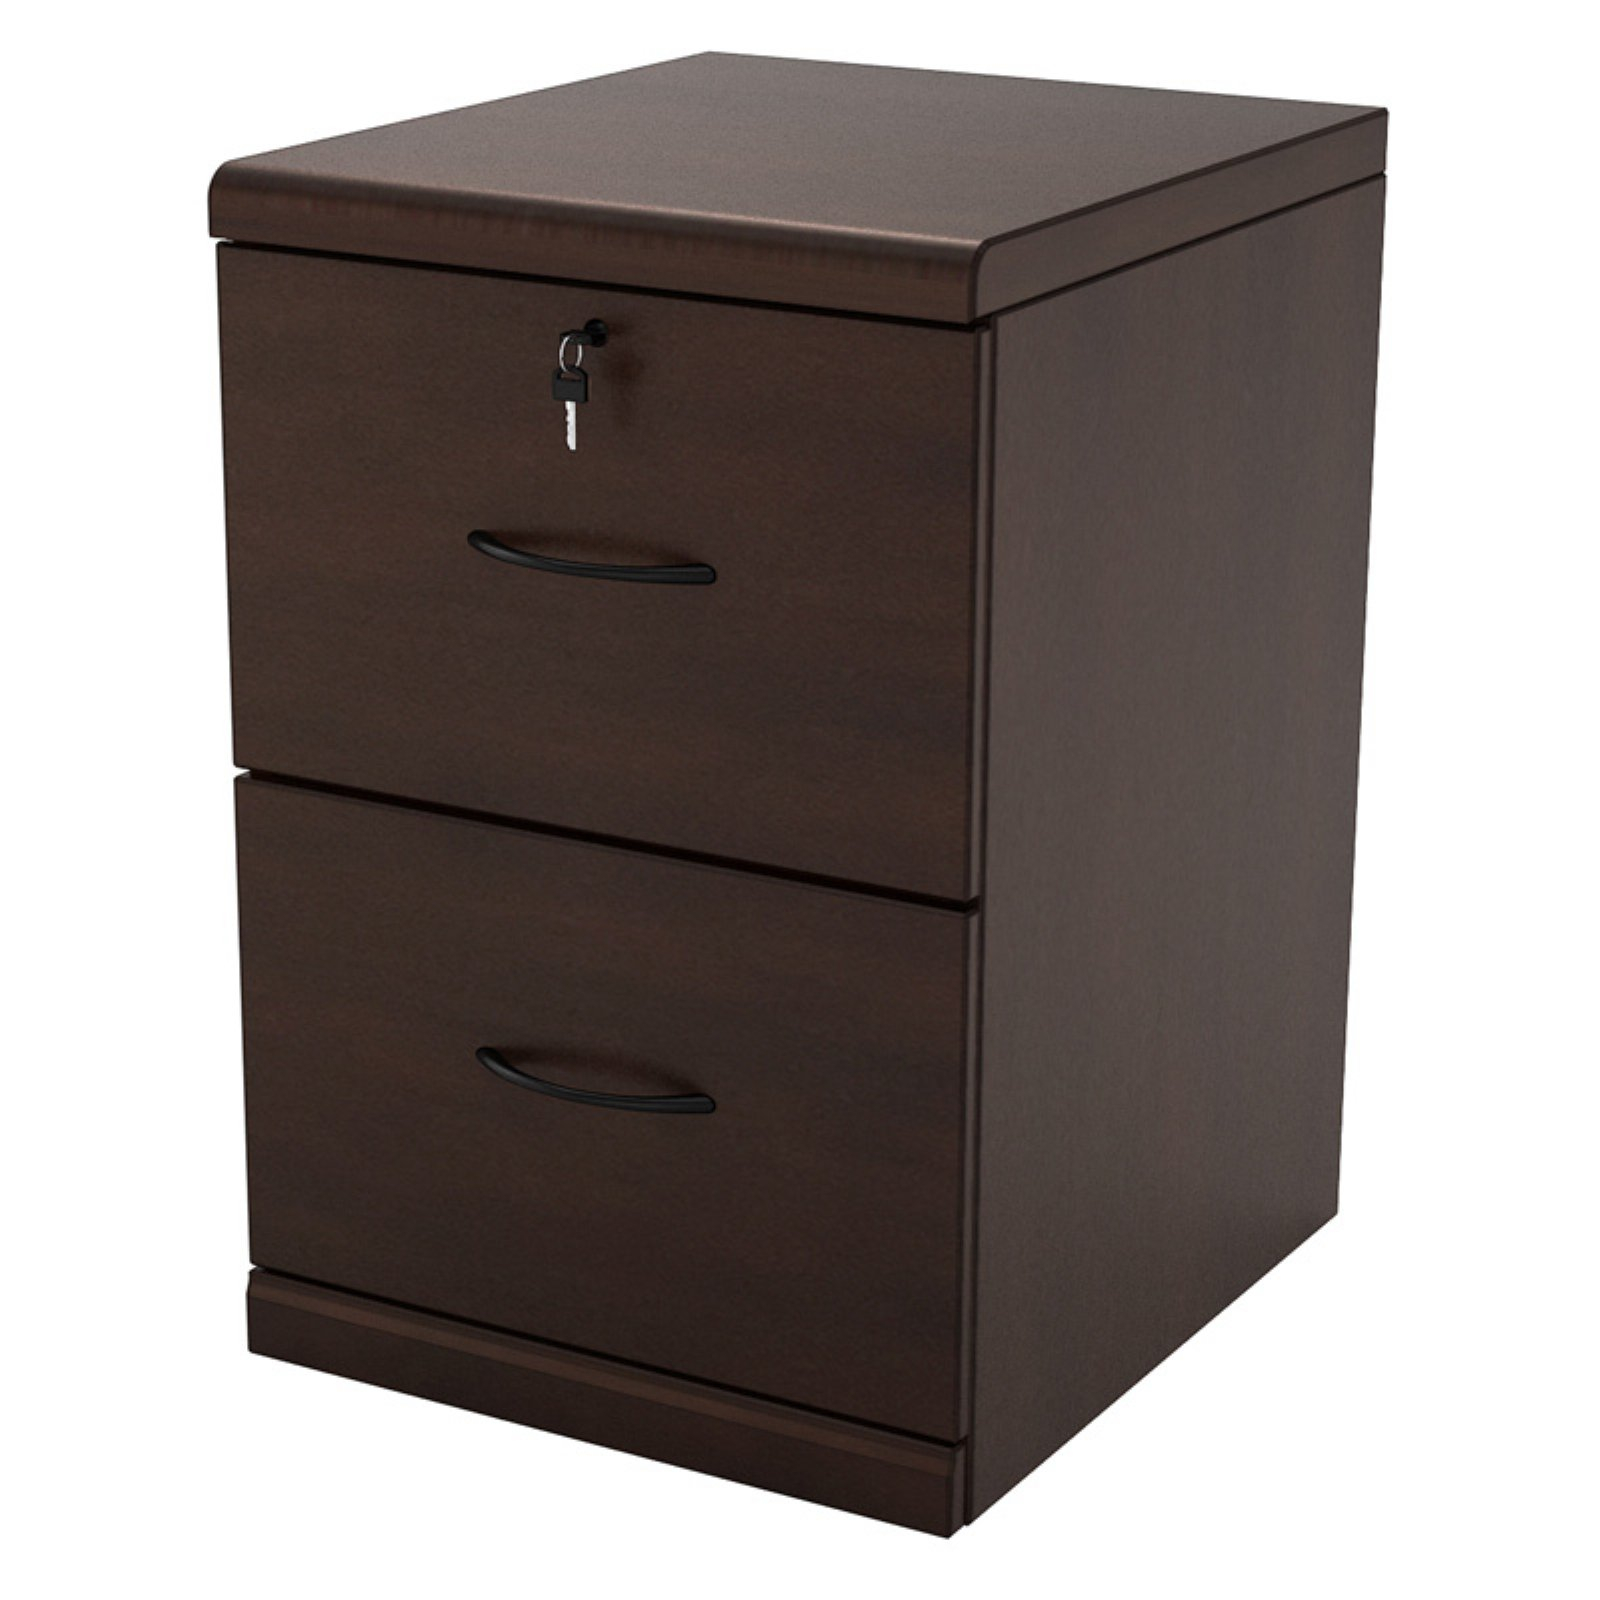 2 Drawer Vertical Wood Lockable Filing Cabinet Espresso Walmart intended for size 1600 X 1600